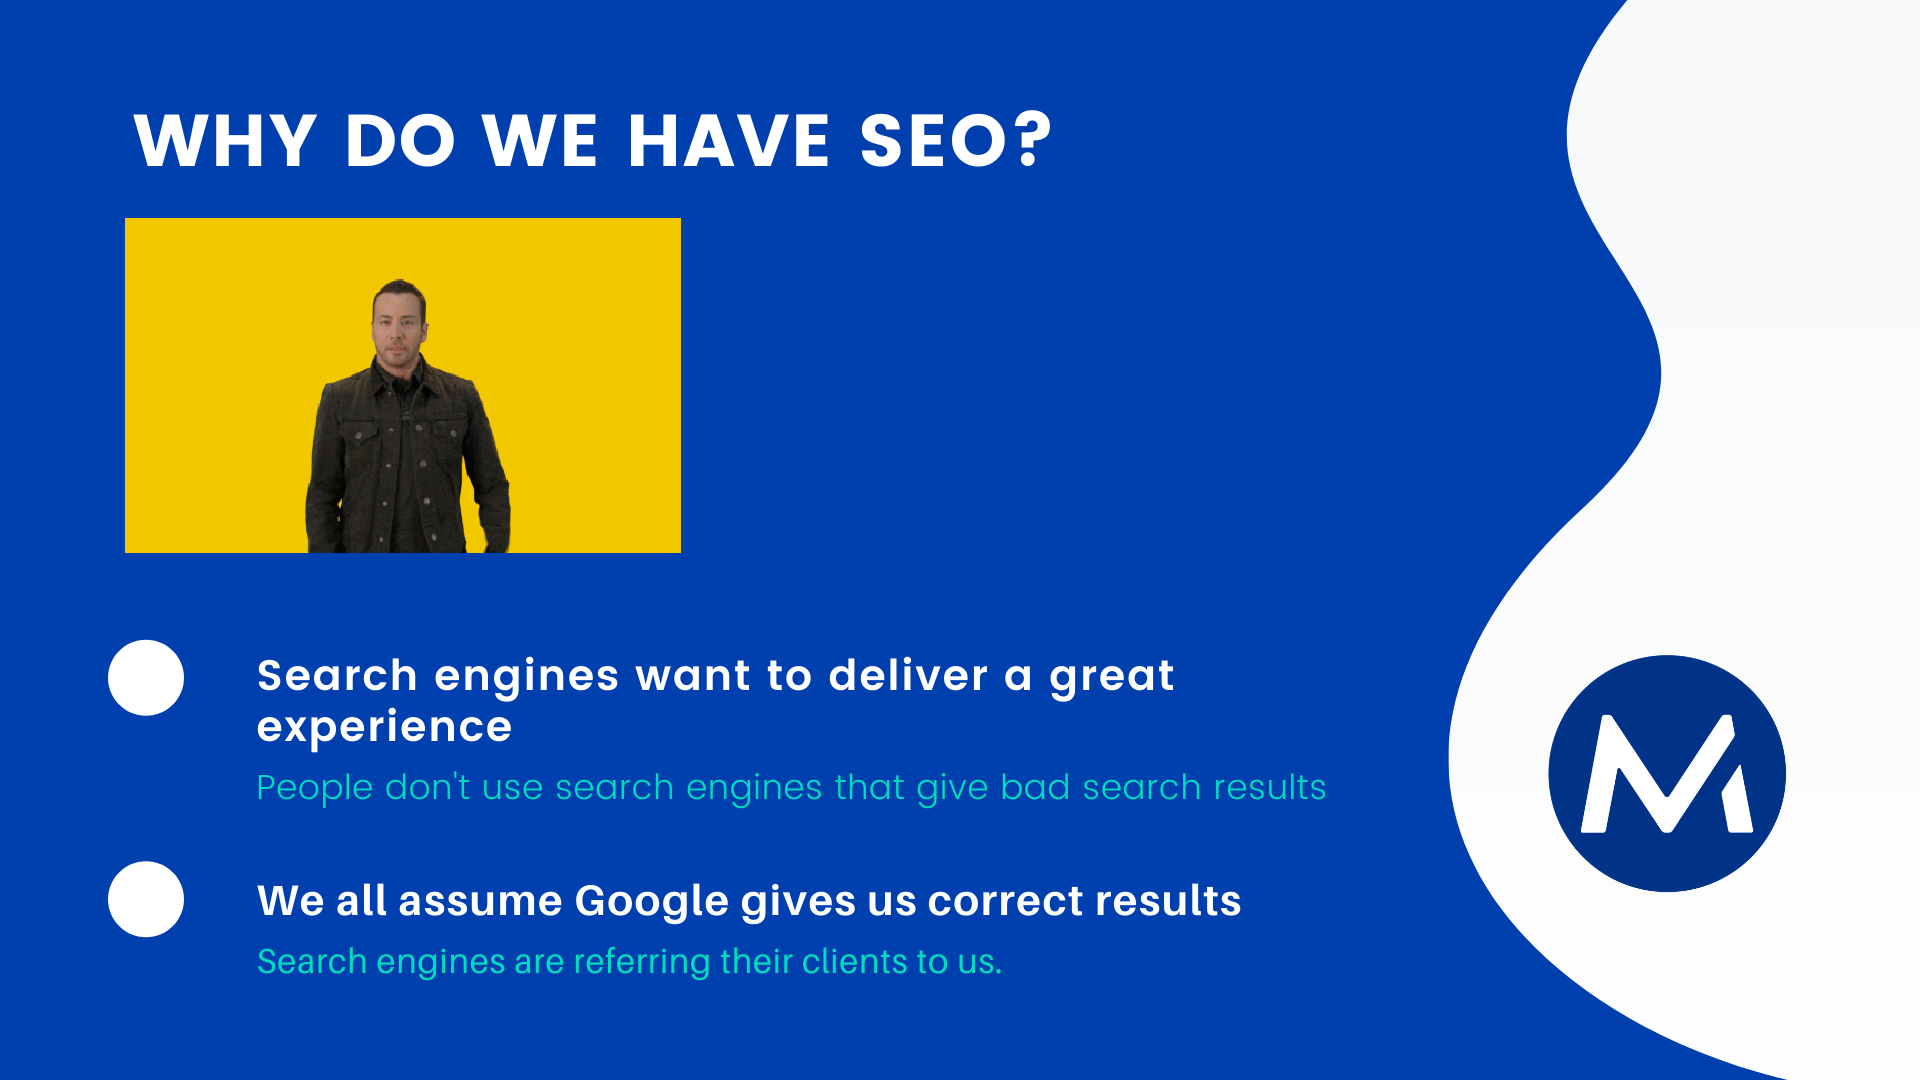 Why do we have SEO?